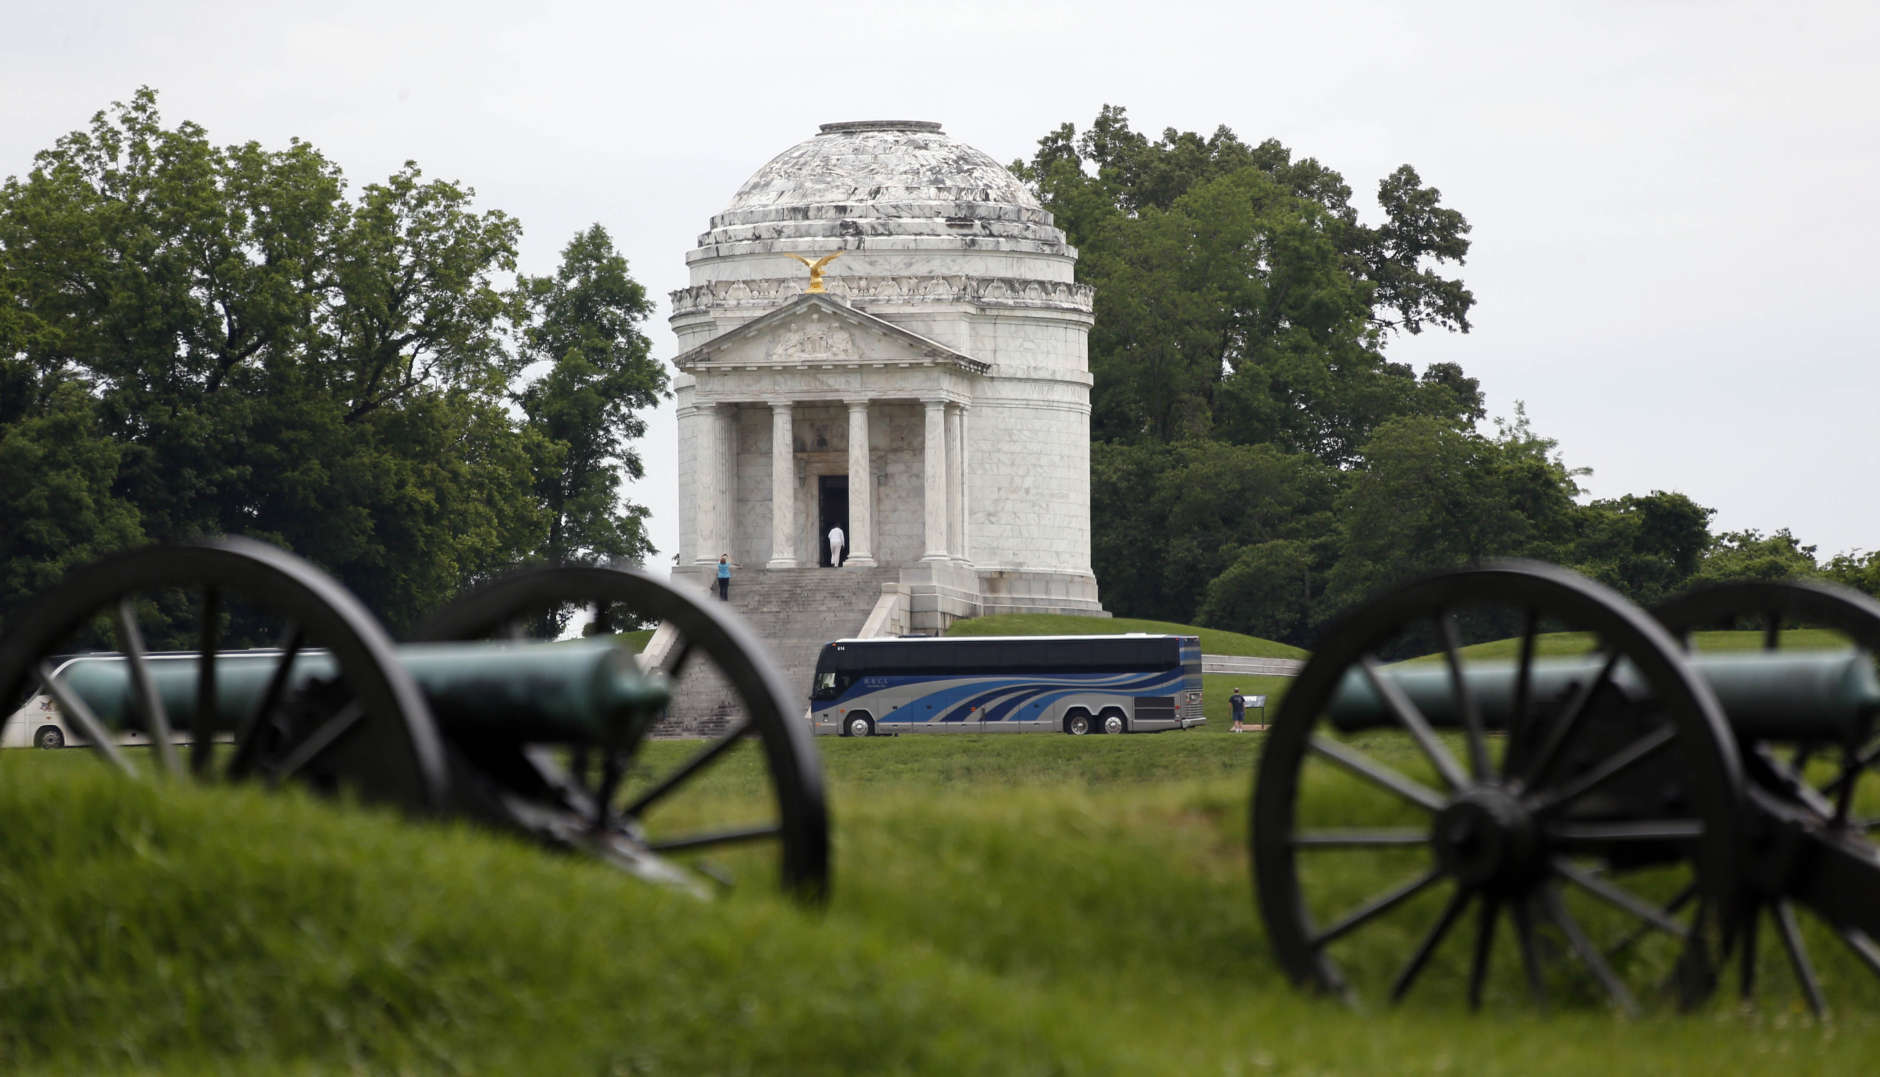 A bus load of visitors pull up to the Illinois Memorial at the Vicksburg National Military Park in Vicksburg, Miss., Wednesday, May 22, 2013. Even 150 years later, Vicksburg is still overshadowed by Gettysburg _ so much so, that the Mississippi city is having its Civil War commemoration a few weeks early rather than compete with Pennsylvania for tourist dollars around July 4. History buffs are traveling to battlegrounds to mark the 150th anniversary of the Civil War from 2011 to 2015. Union forces waged a long campaign to conquer Vicksburg and gain control of the lower Mississippi River. The effort culminated in a concentrated military attack that started May 18, 1863, and a siege that started eight days later. Confederate forces surrendered the city on July 4. (AP Photo/Rogelio V. Solis)